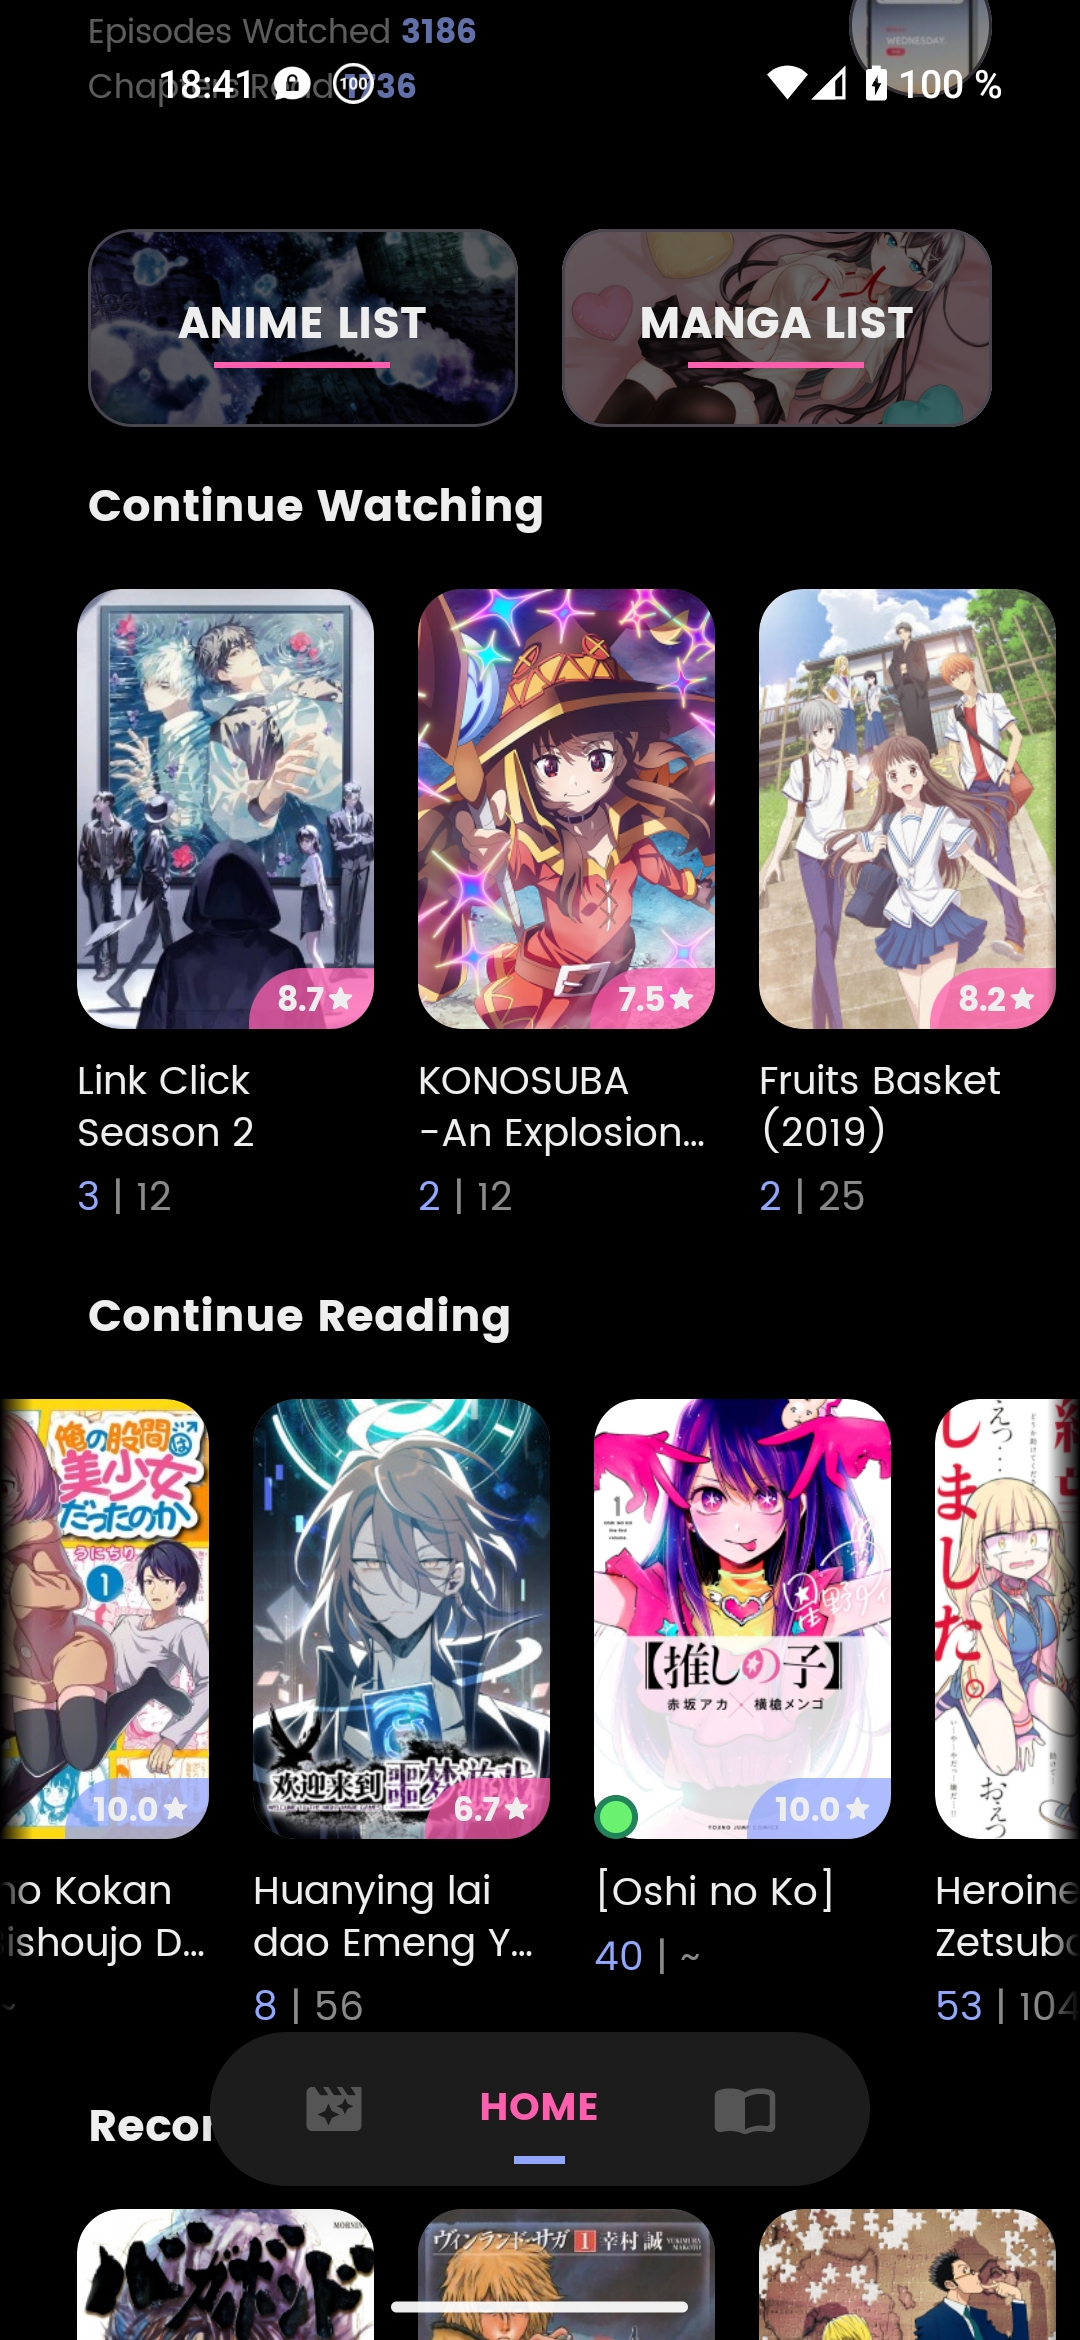 Saikou - the best Anime streaming app on Android - got DMCA'd : r/Piracy